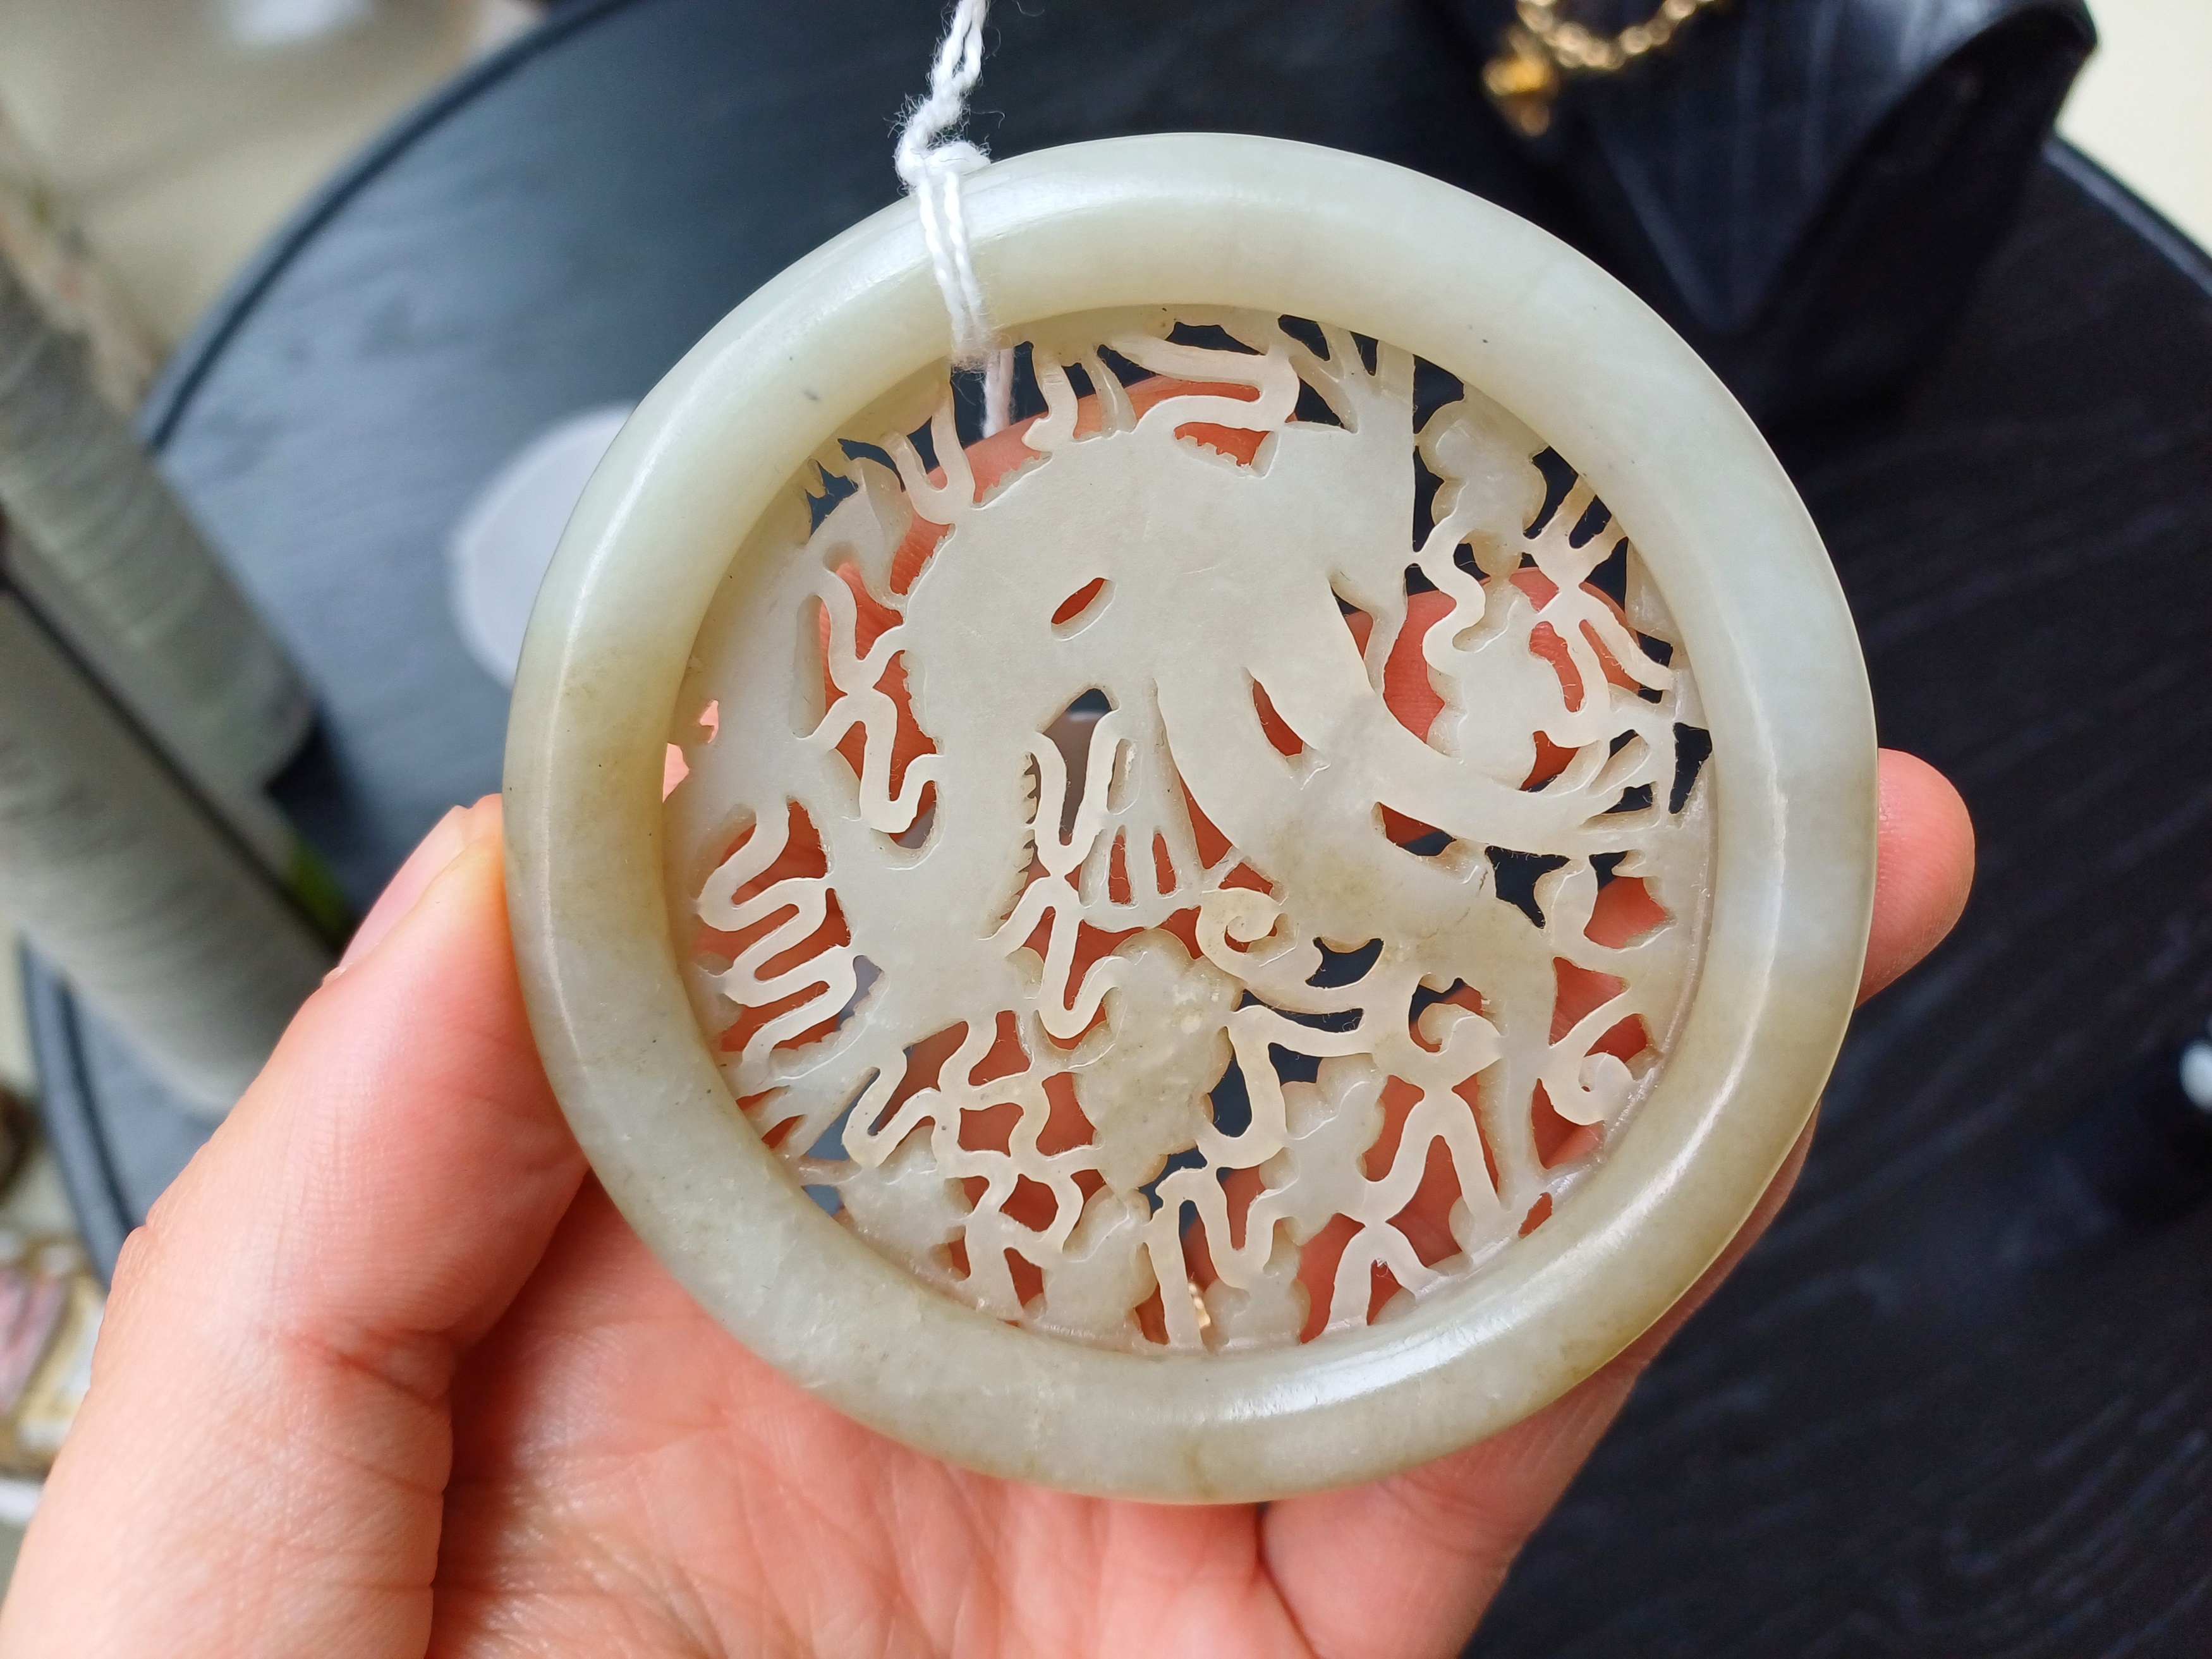 A CHINESE RETICULATED WHITE AND RUSSET JADE 'DRAGON' ROUND PLAQUE 十九世紀 白玉糖色龍趕珠紋珮 - Image 7 of 10